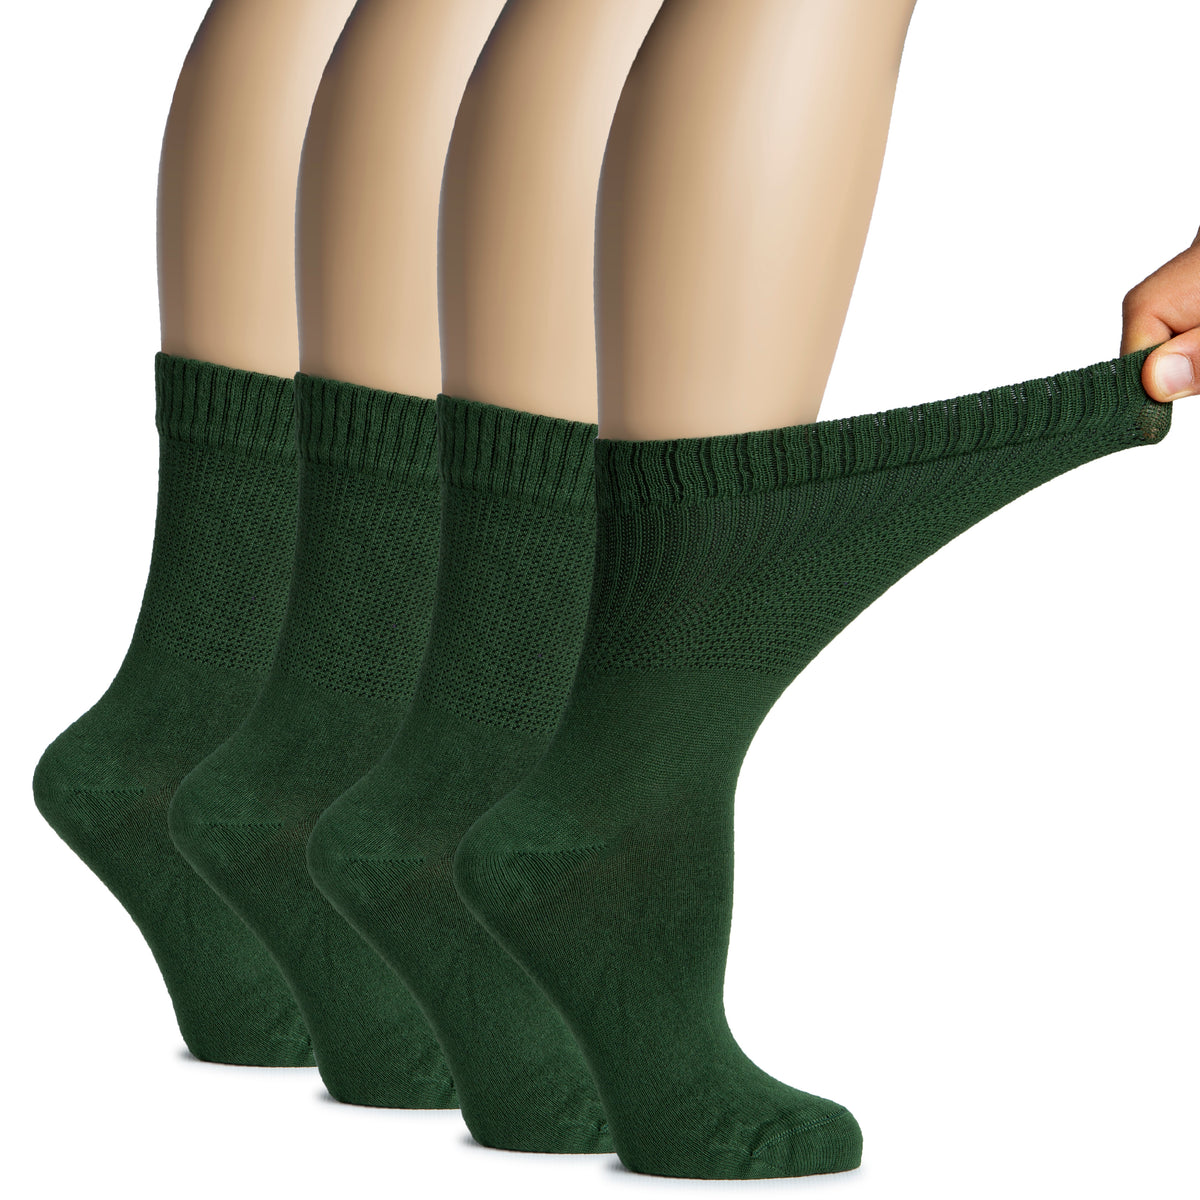 A man's hand holding two pair of Women's Bamboo Diabetic Crew Socks in green color, designed for comfort and health.